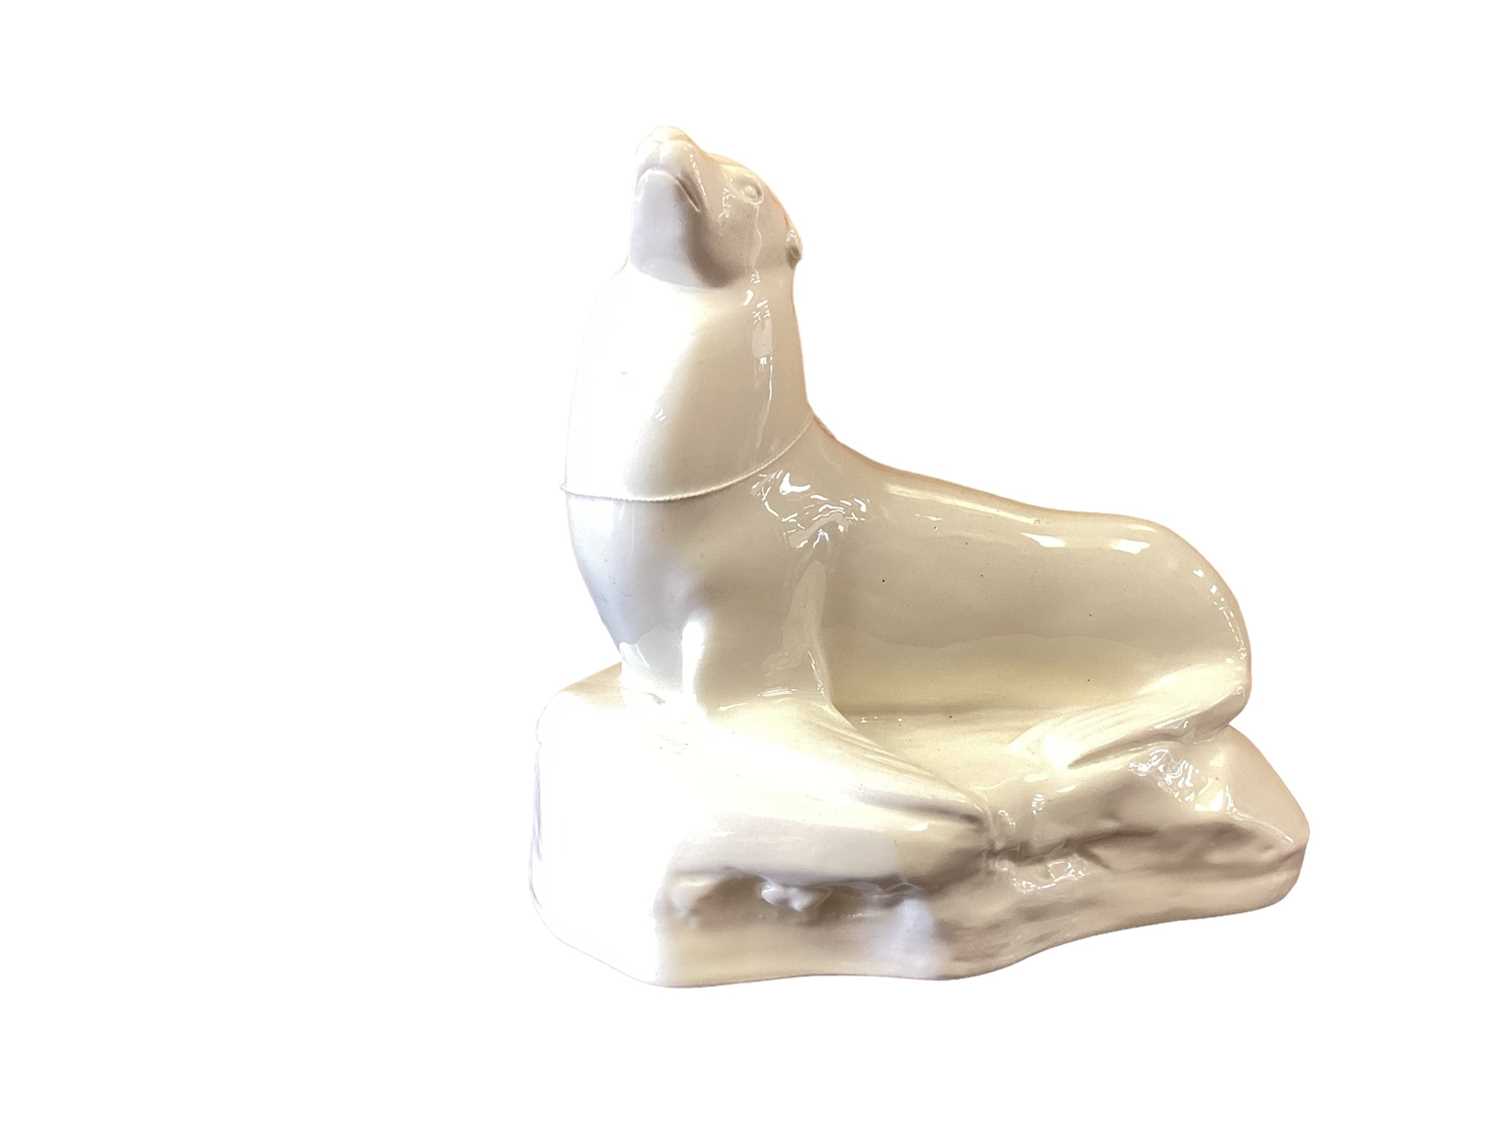 Lot 1203 - A John Skeaping for Wedgwood cream glazed model of a Seal, circa 1920s, the seal raised on front flippers and set on a stylised 'glacier' base, impressed 'John Skeaping' mark to back of base, impre...